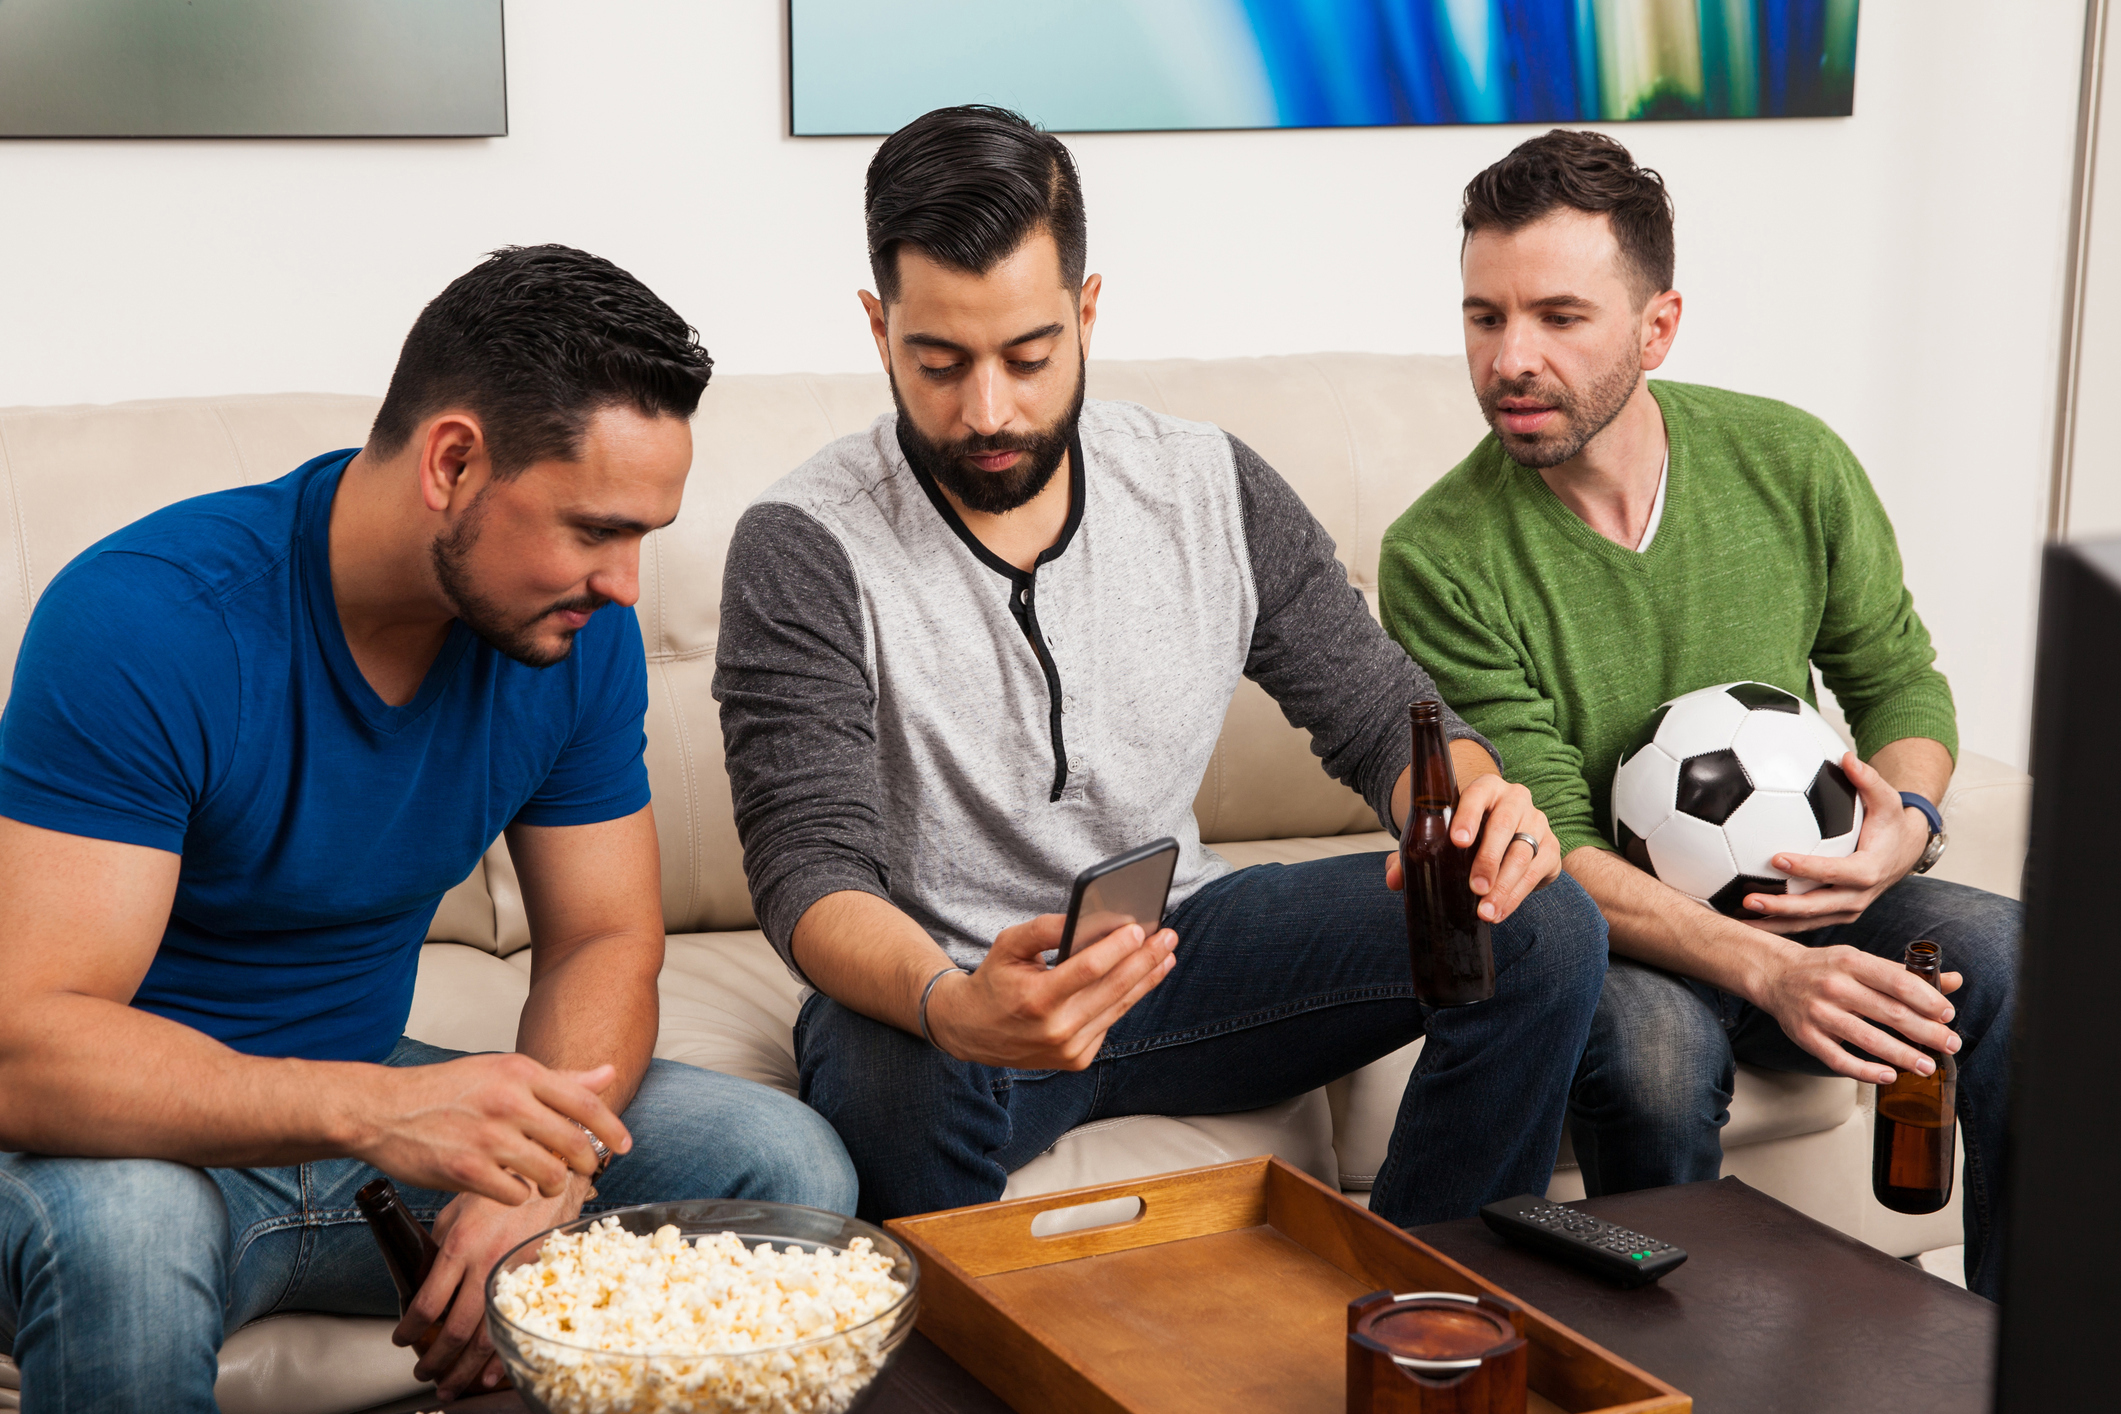 Group of friends checking their team stats on a smartphone while watching a soccer game on TV. (Antonio_Diaz/Getty Images)